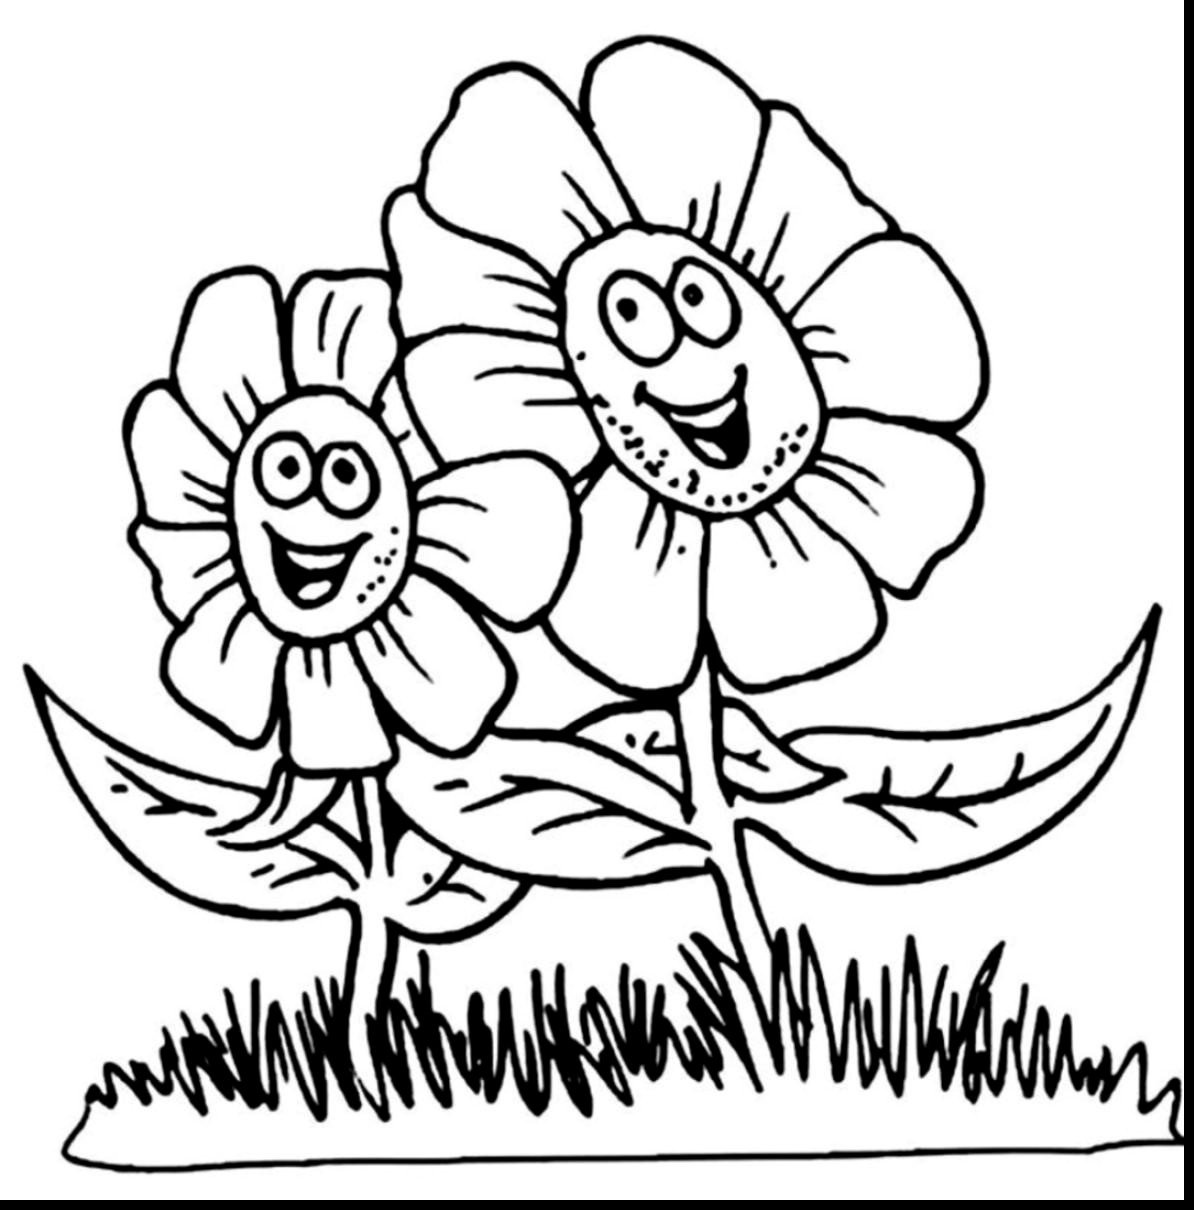 Spring Coloring Pages For Toddlers Spring Coloring Pages For Toddlers Printable Coloring Page For Kids